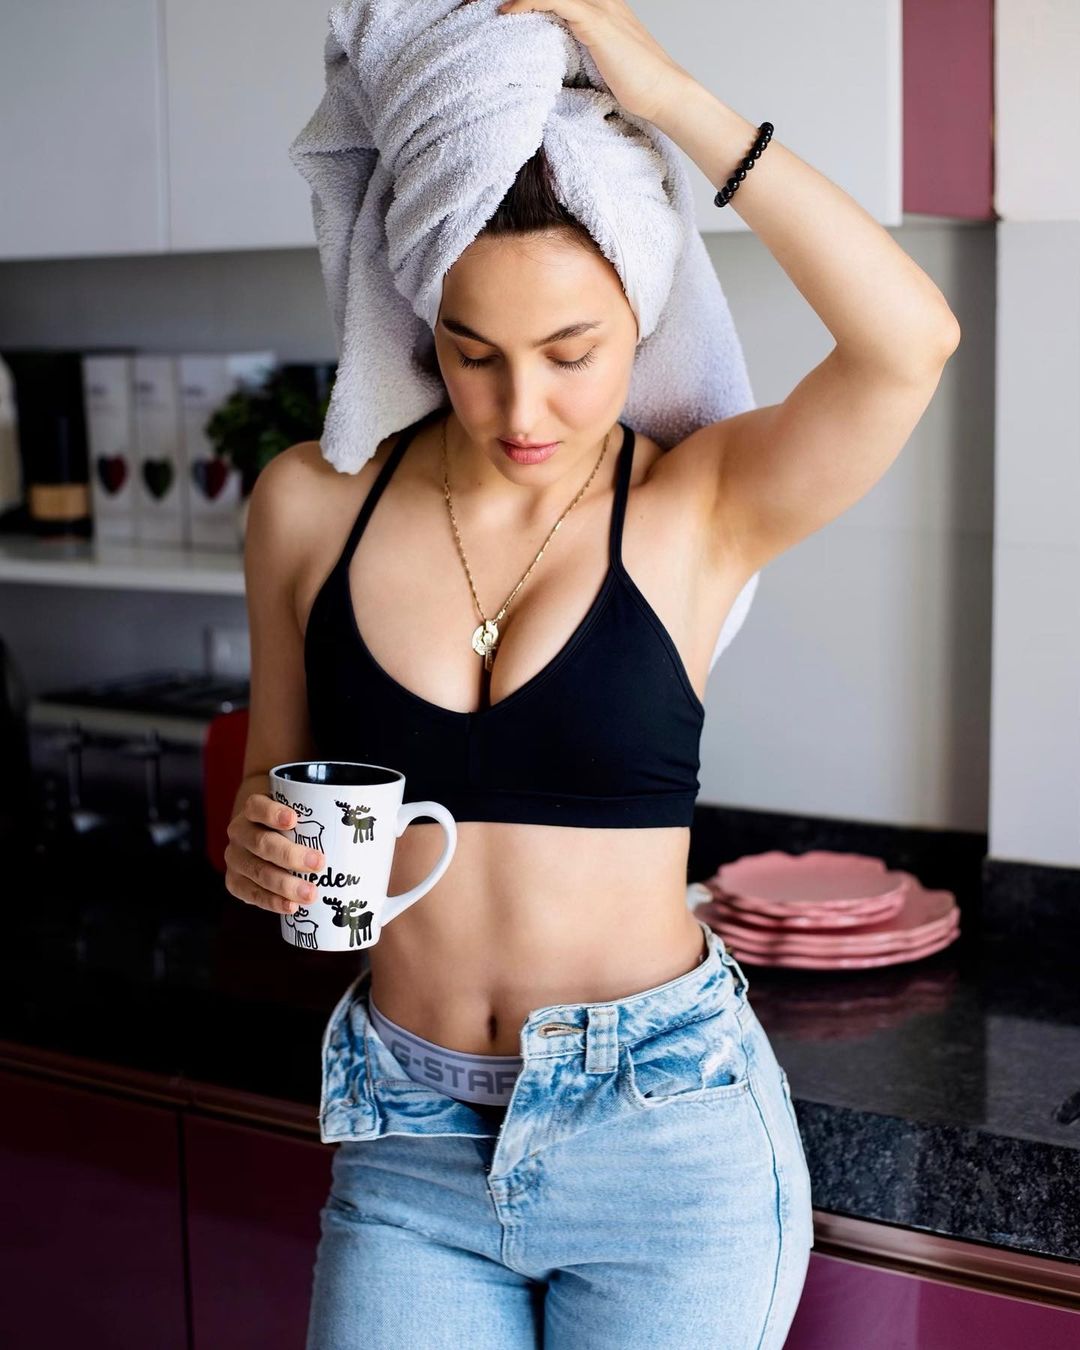 Elli AvrRam looks sexy in a black bra and blue denims, with a towel wrapped around her head